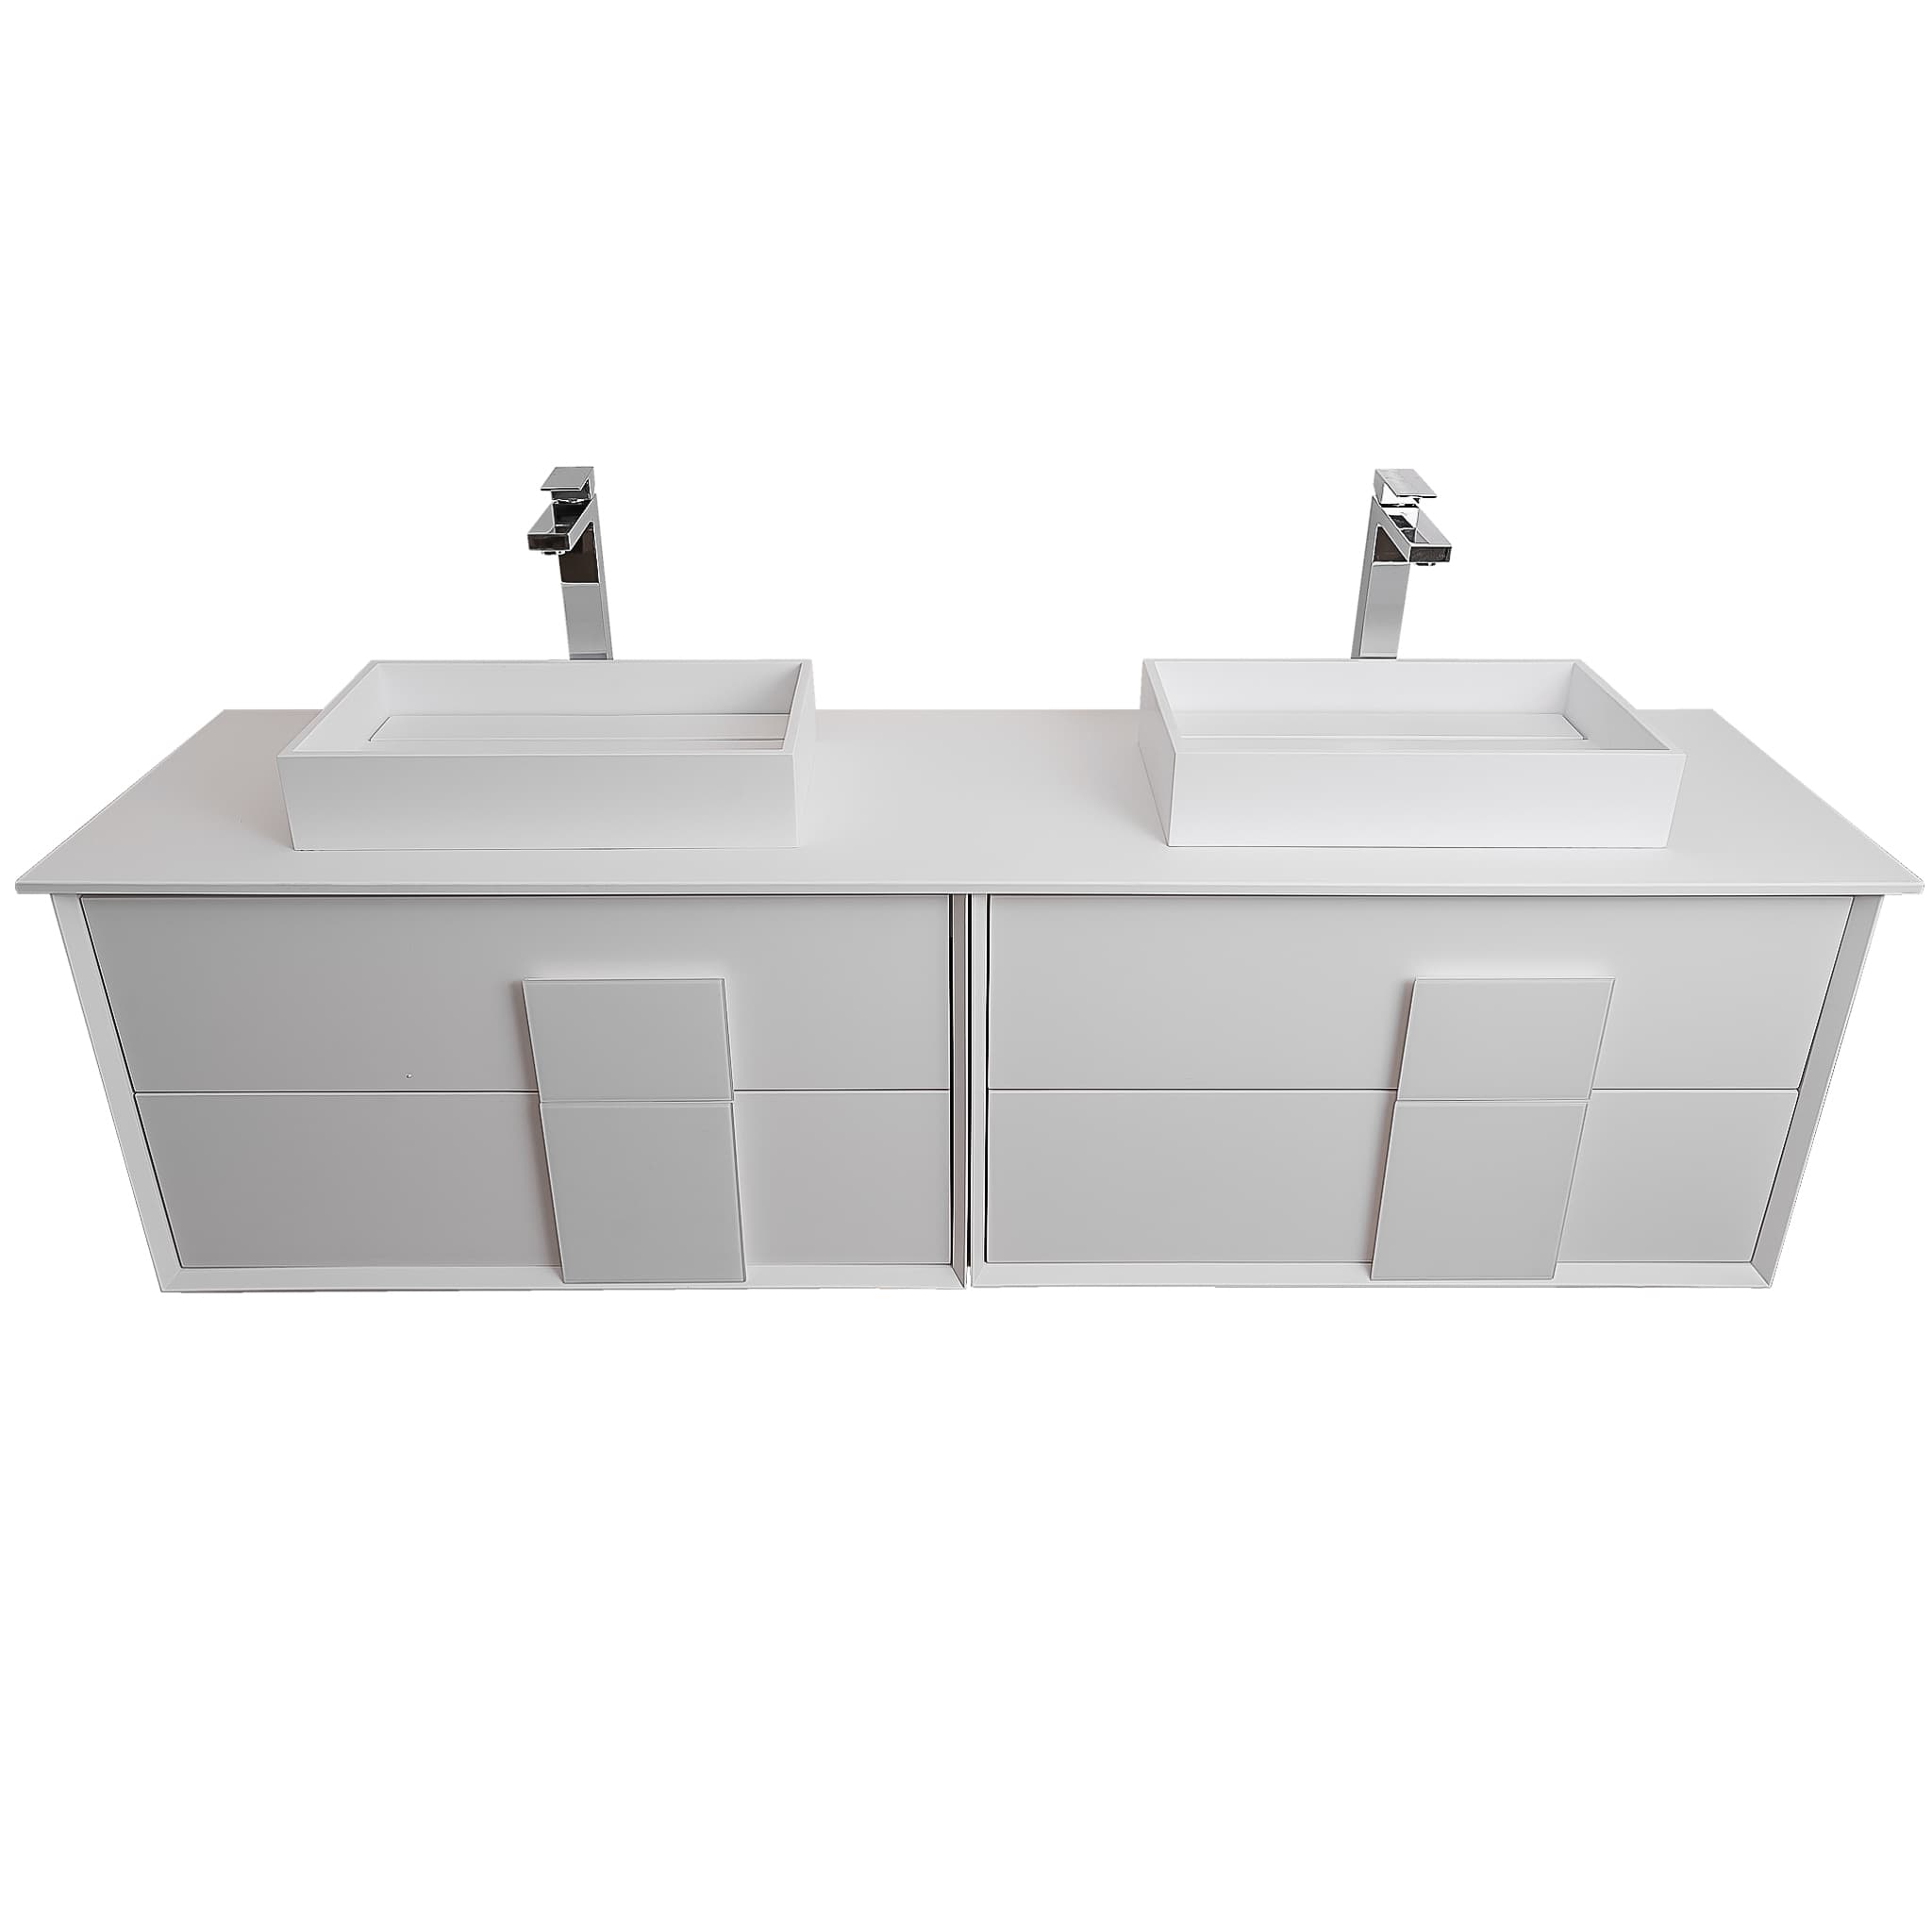 Piazza 63 Matte White With White Handle Cabinet, Solid Surface Flat White Counter and Two Infinity Square Solid Surface White Basin 1329, Wall Mounted Modern Vanity Set